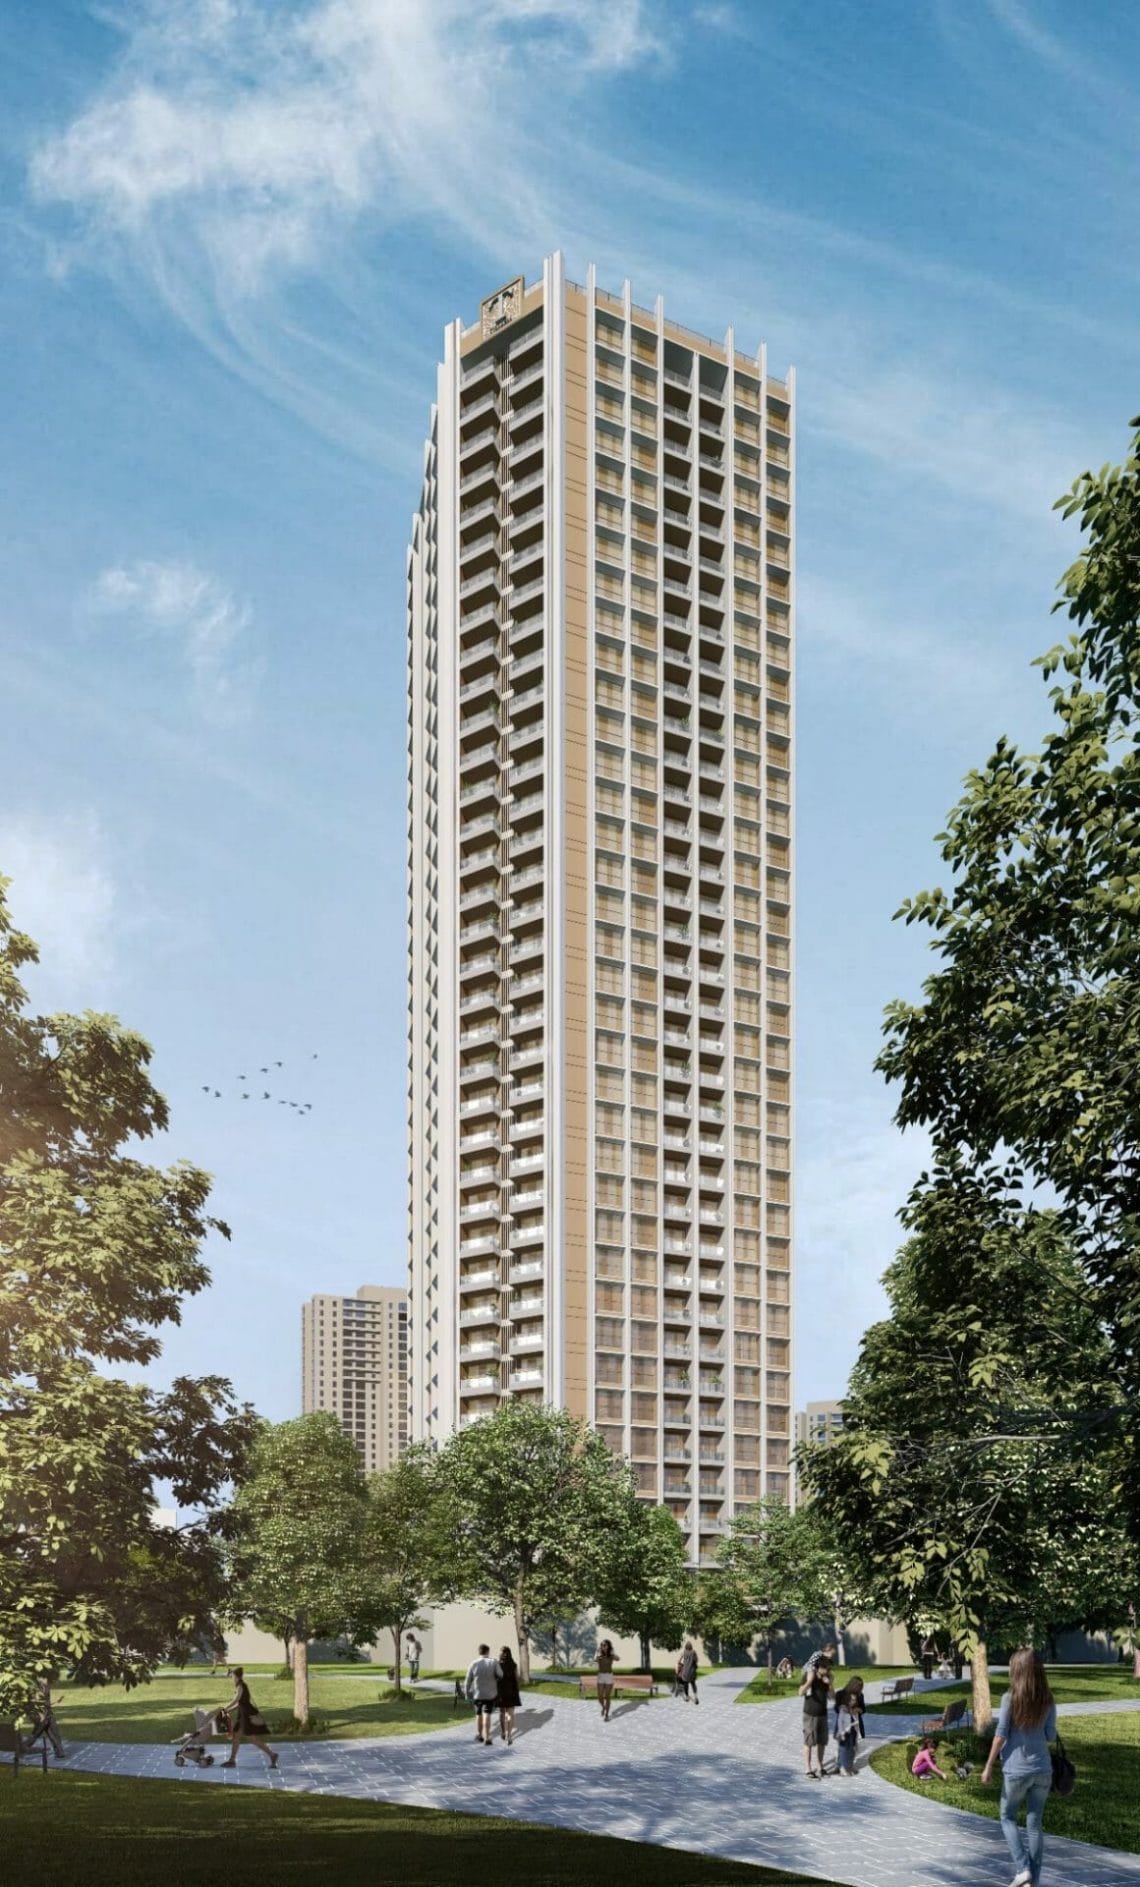 Andheri West to House the Triumph4 Tower Launched by Transcon Developers